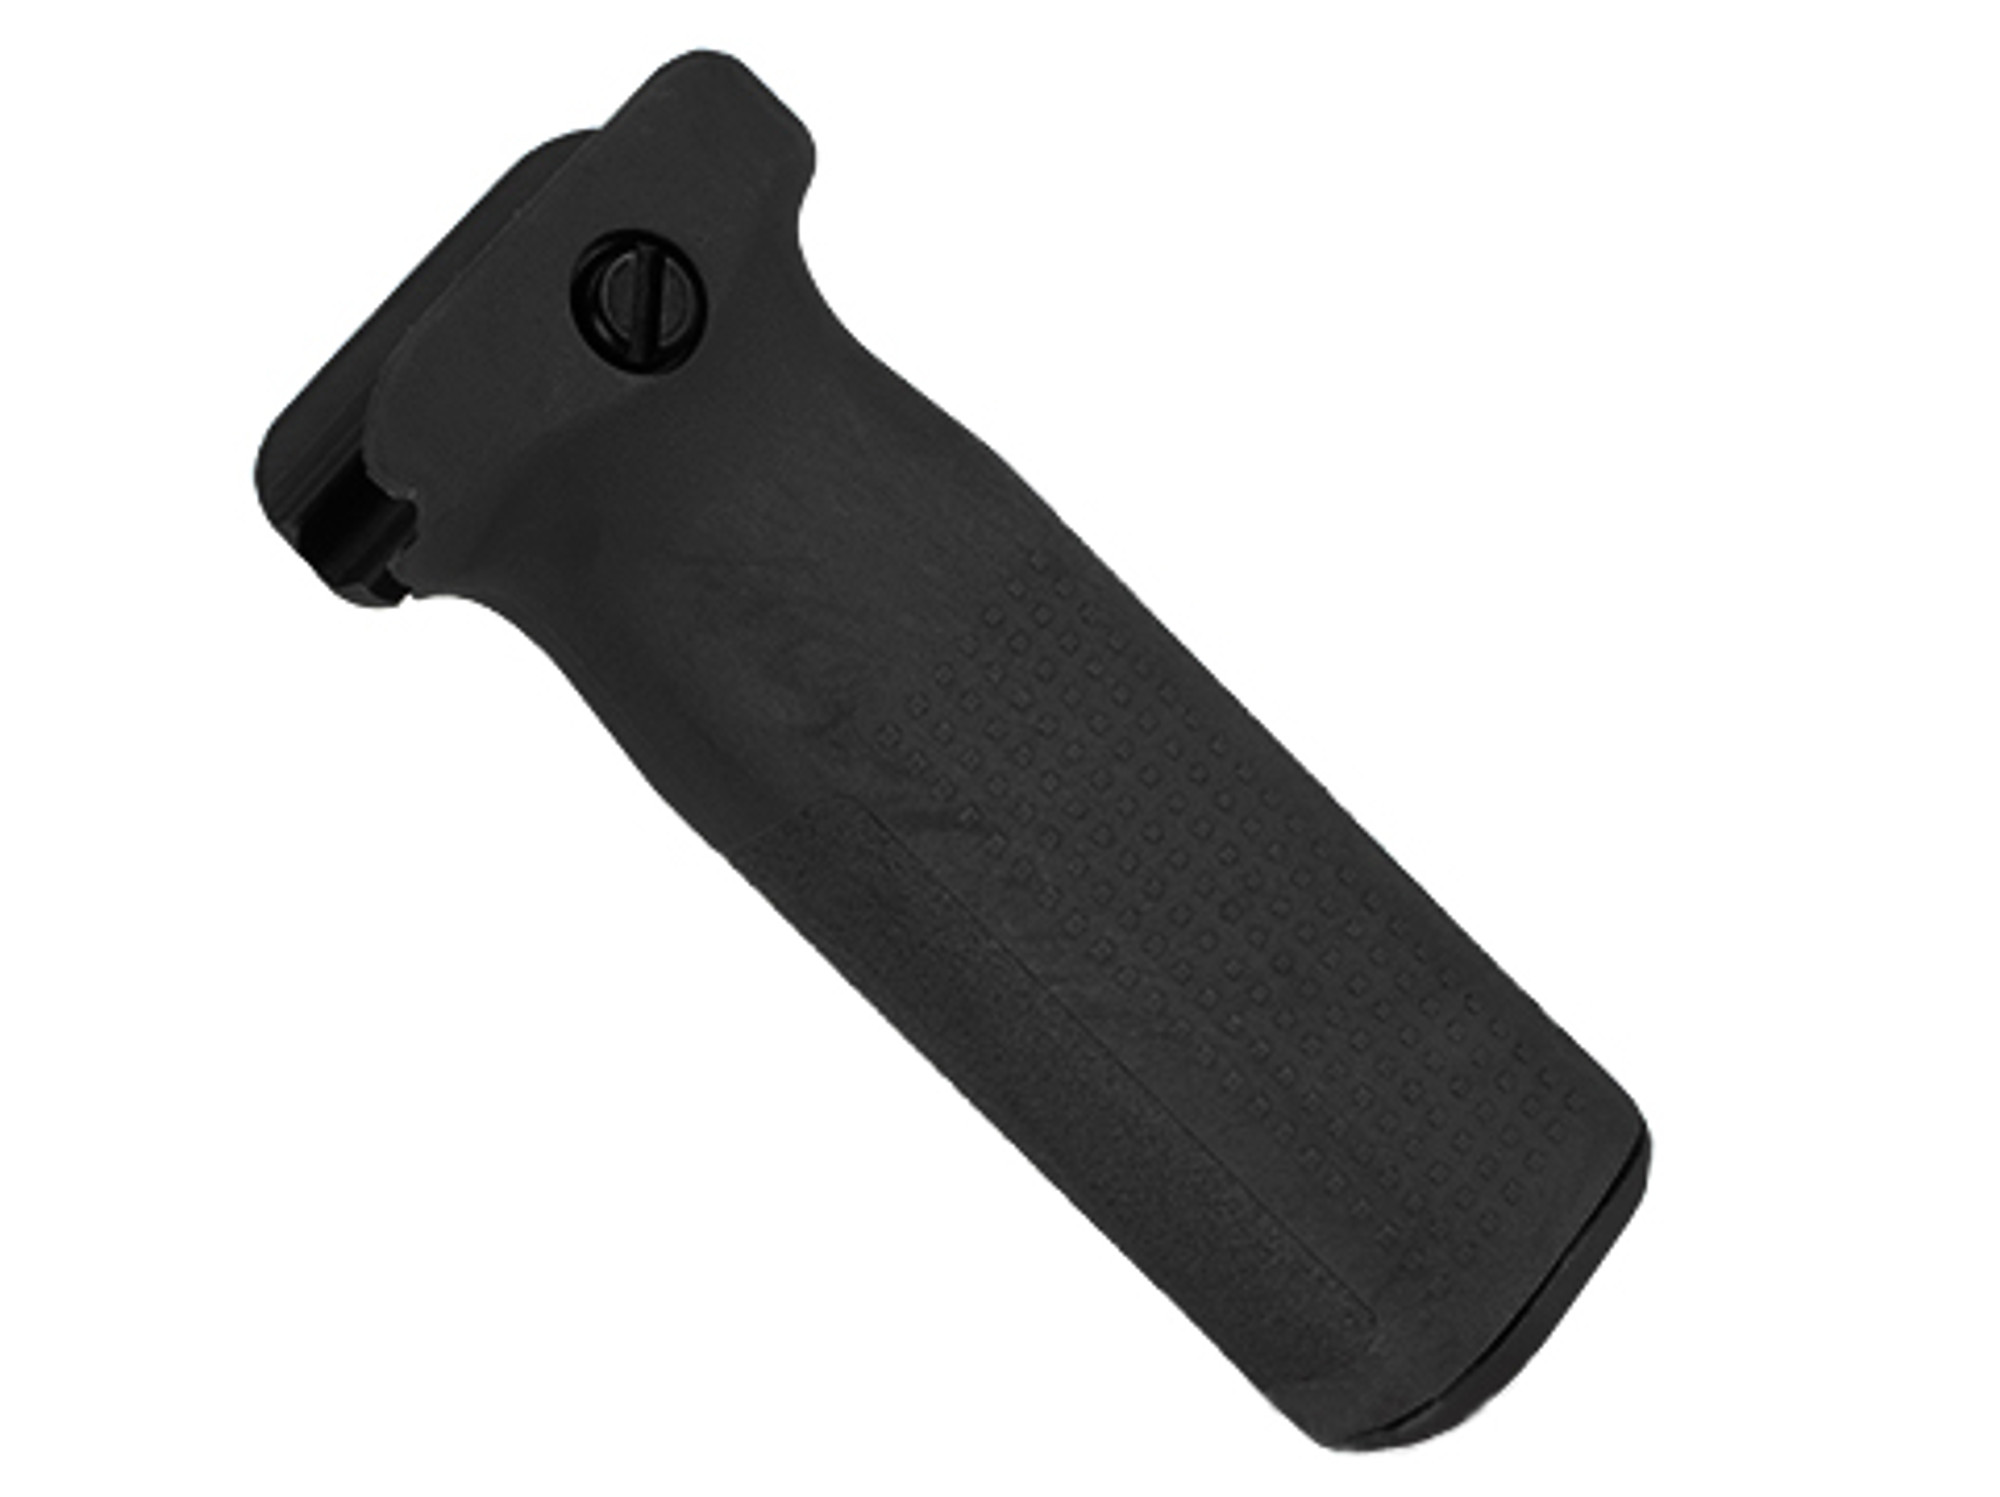 PTS Enhanced Polymer Foregrip (EPF) Vertical Grip for Airsoft Hand Guards - Black